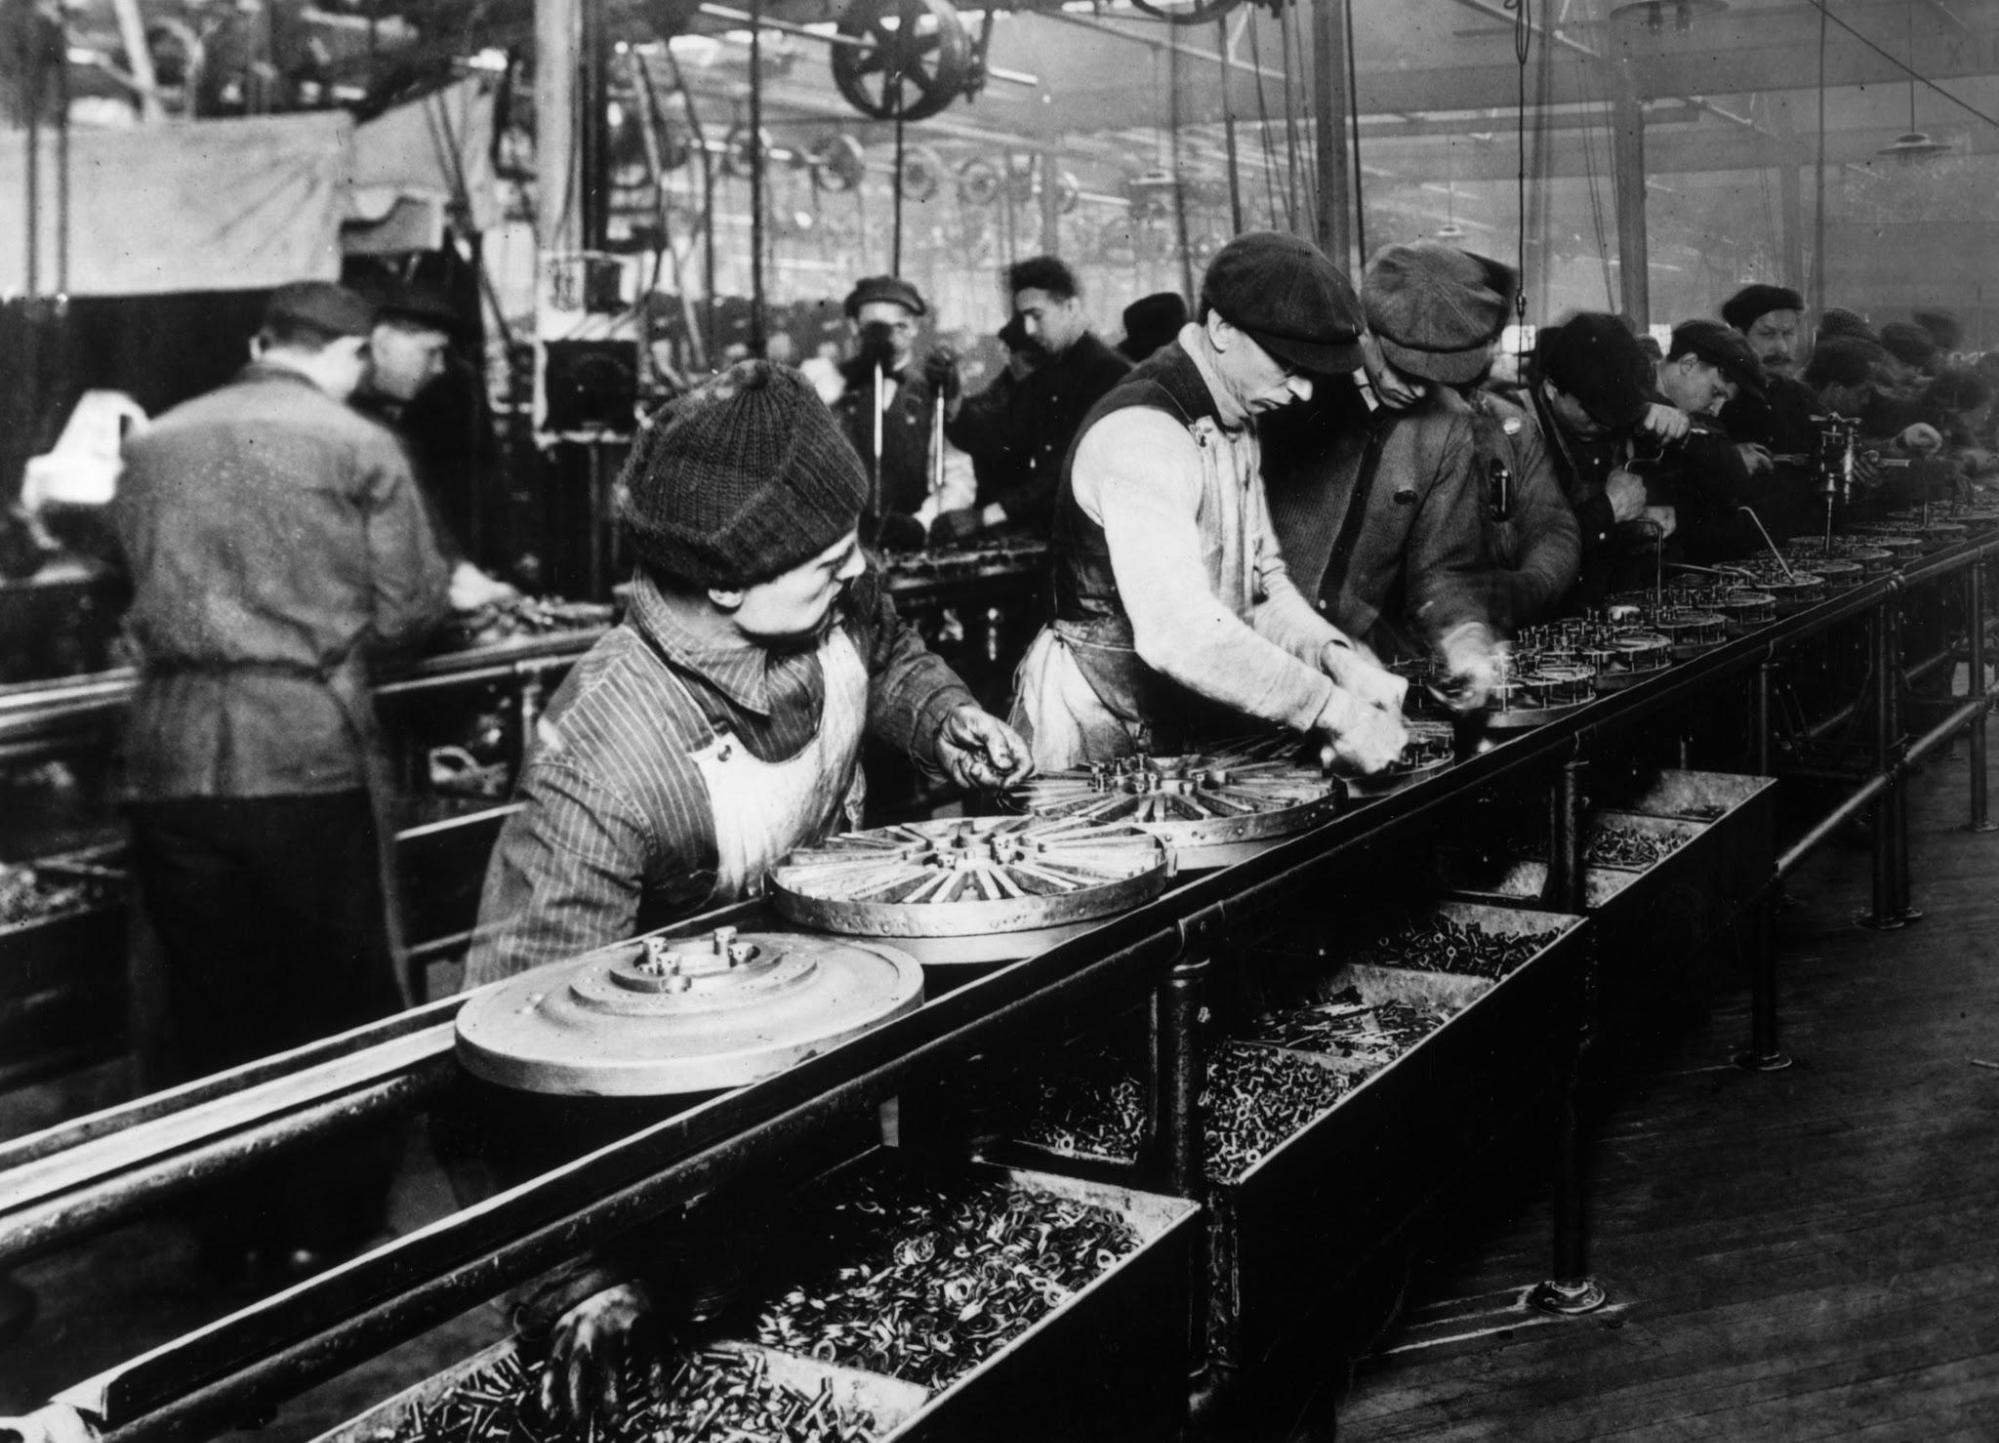 A black and white photograph shows men lined up close together working an assembly line with various parts.